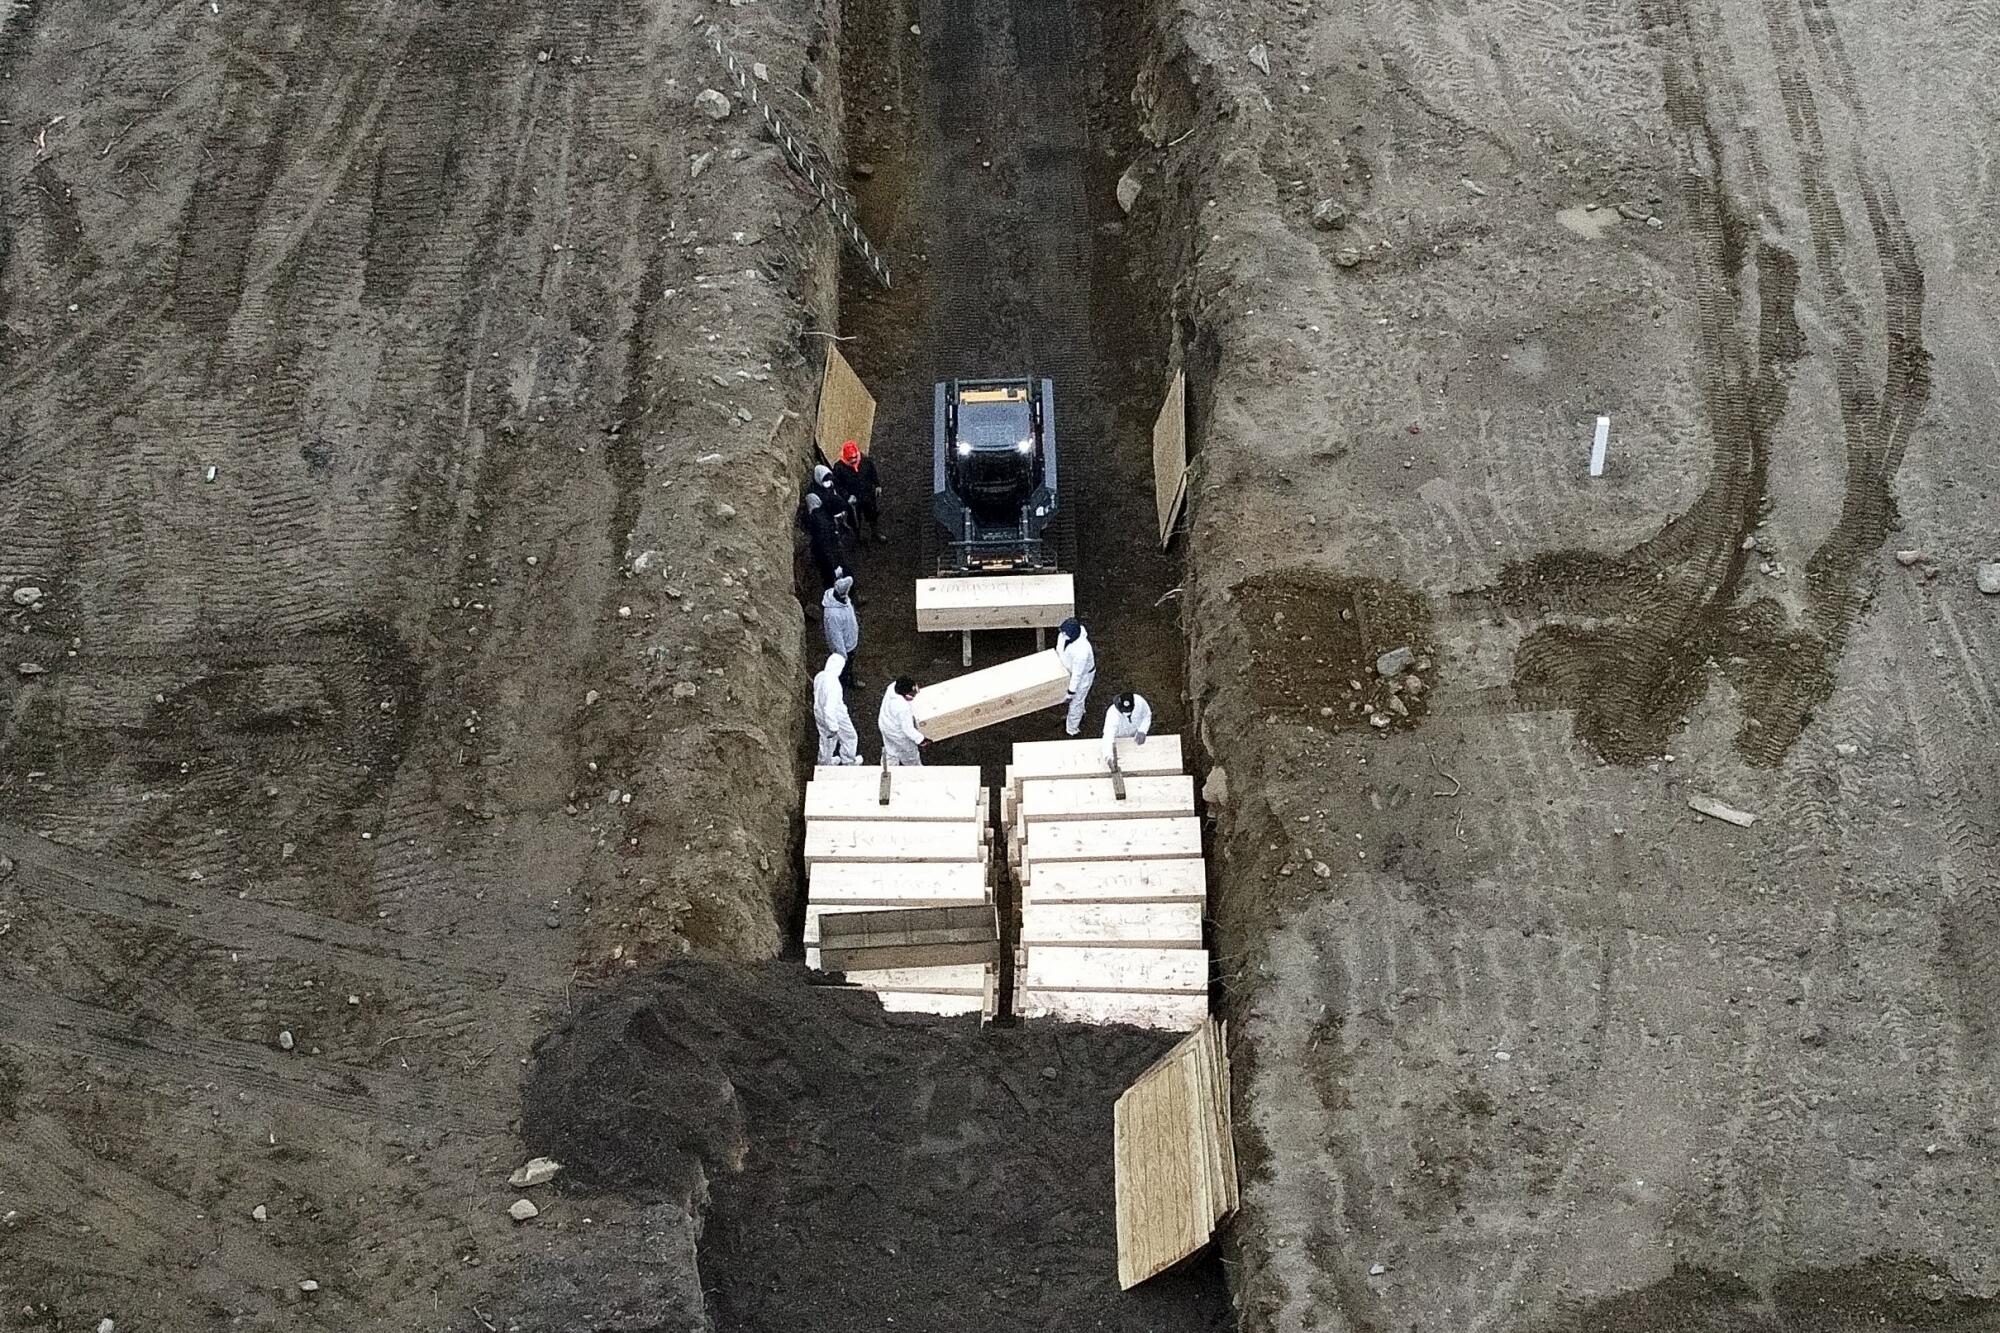 Workers wearing personal protective equipment bury bodies April 9 in a trench on Hart Island in the Bronx, N.Y.